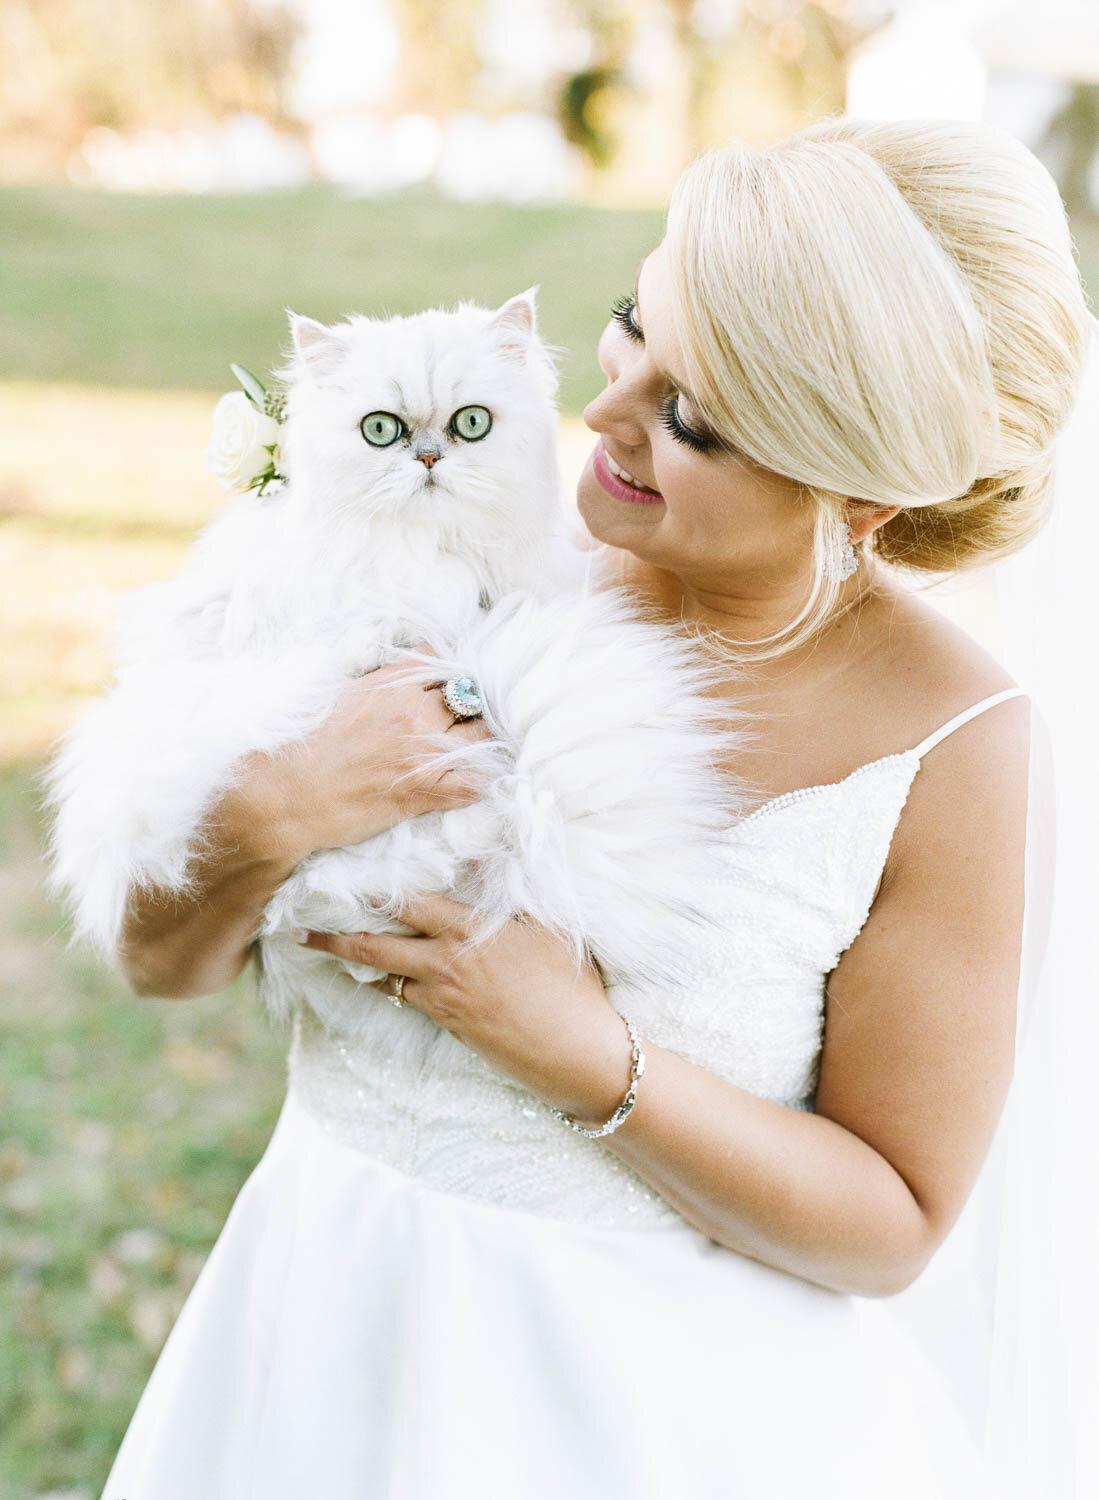 Bride and cat at wedding 